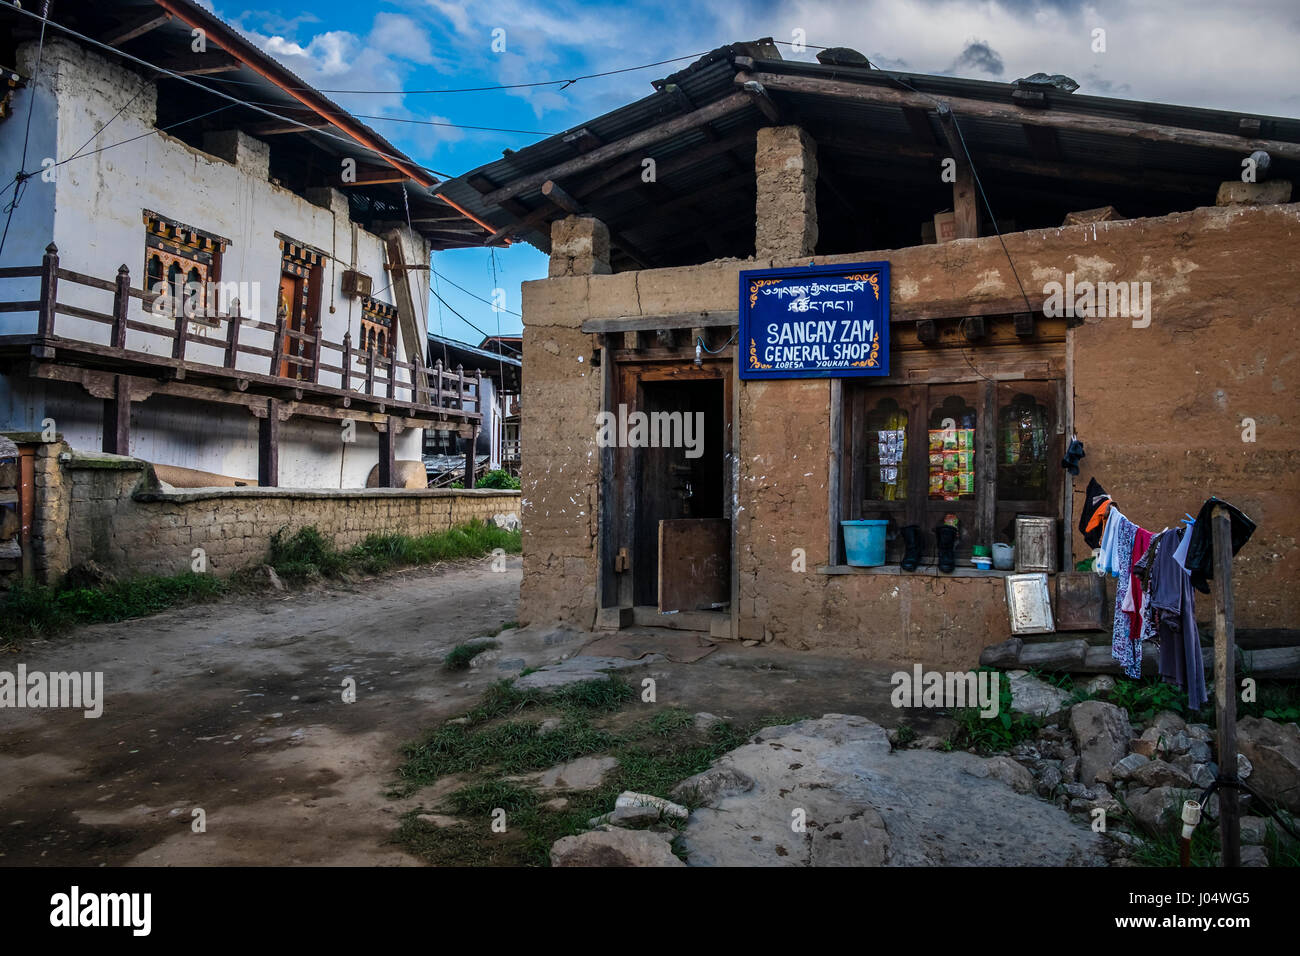 LOBESA, BHUTAN - CIRCA OCTOBER 2014: General Shop in the village of Lobesa, Chimi Lhakhang close to the temple of Divine Madman Stock Photo